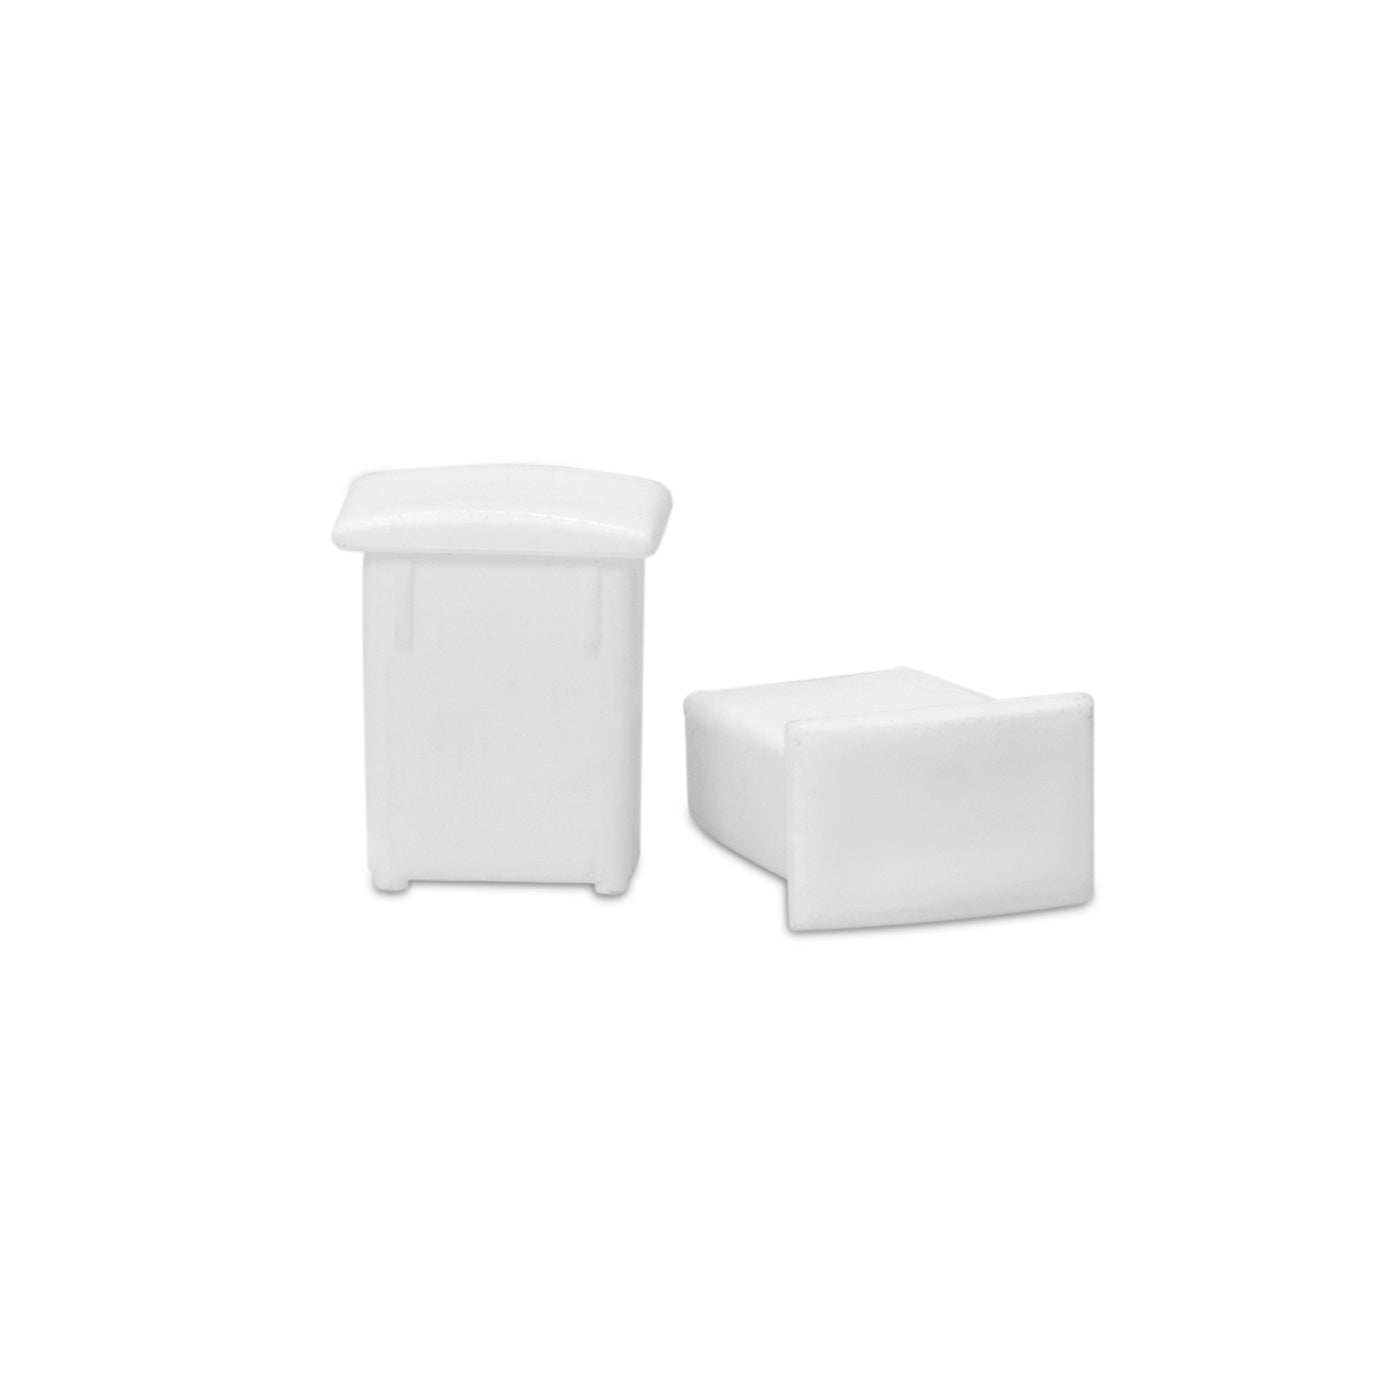 FORTIS WALL END CAPS for Fortis Wall picture rail system (x2) (FTEC)